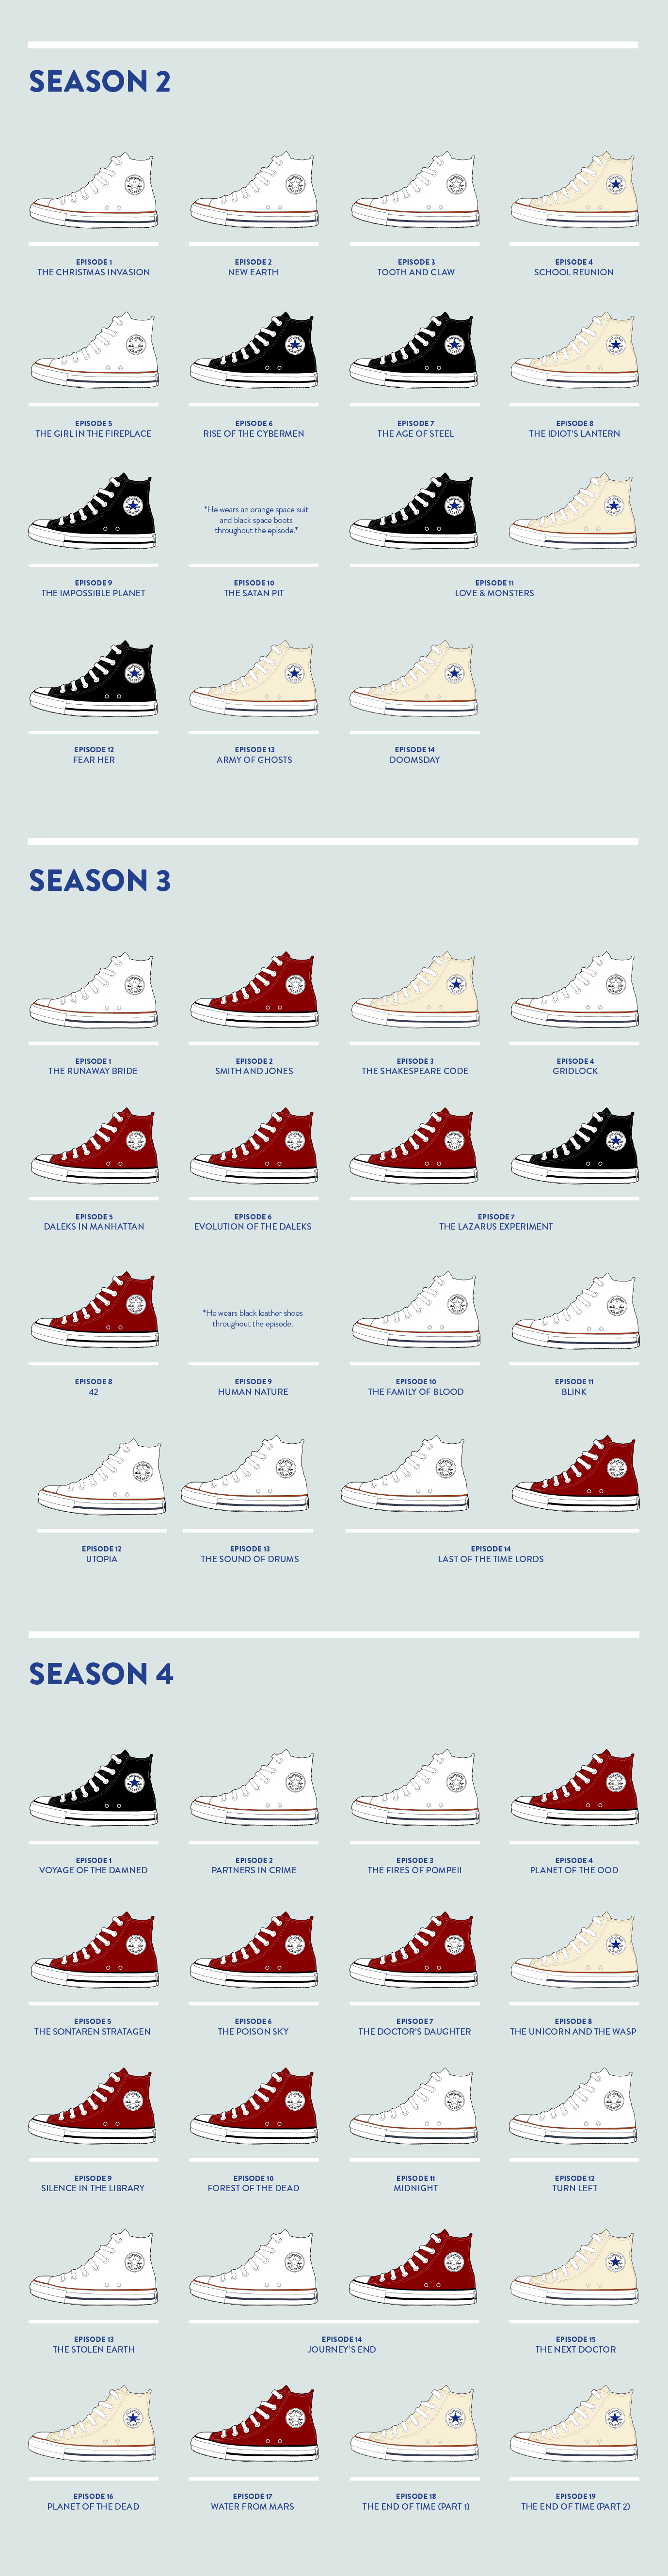 dr who converse sneakers